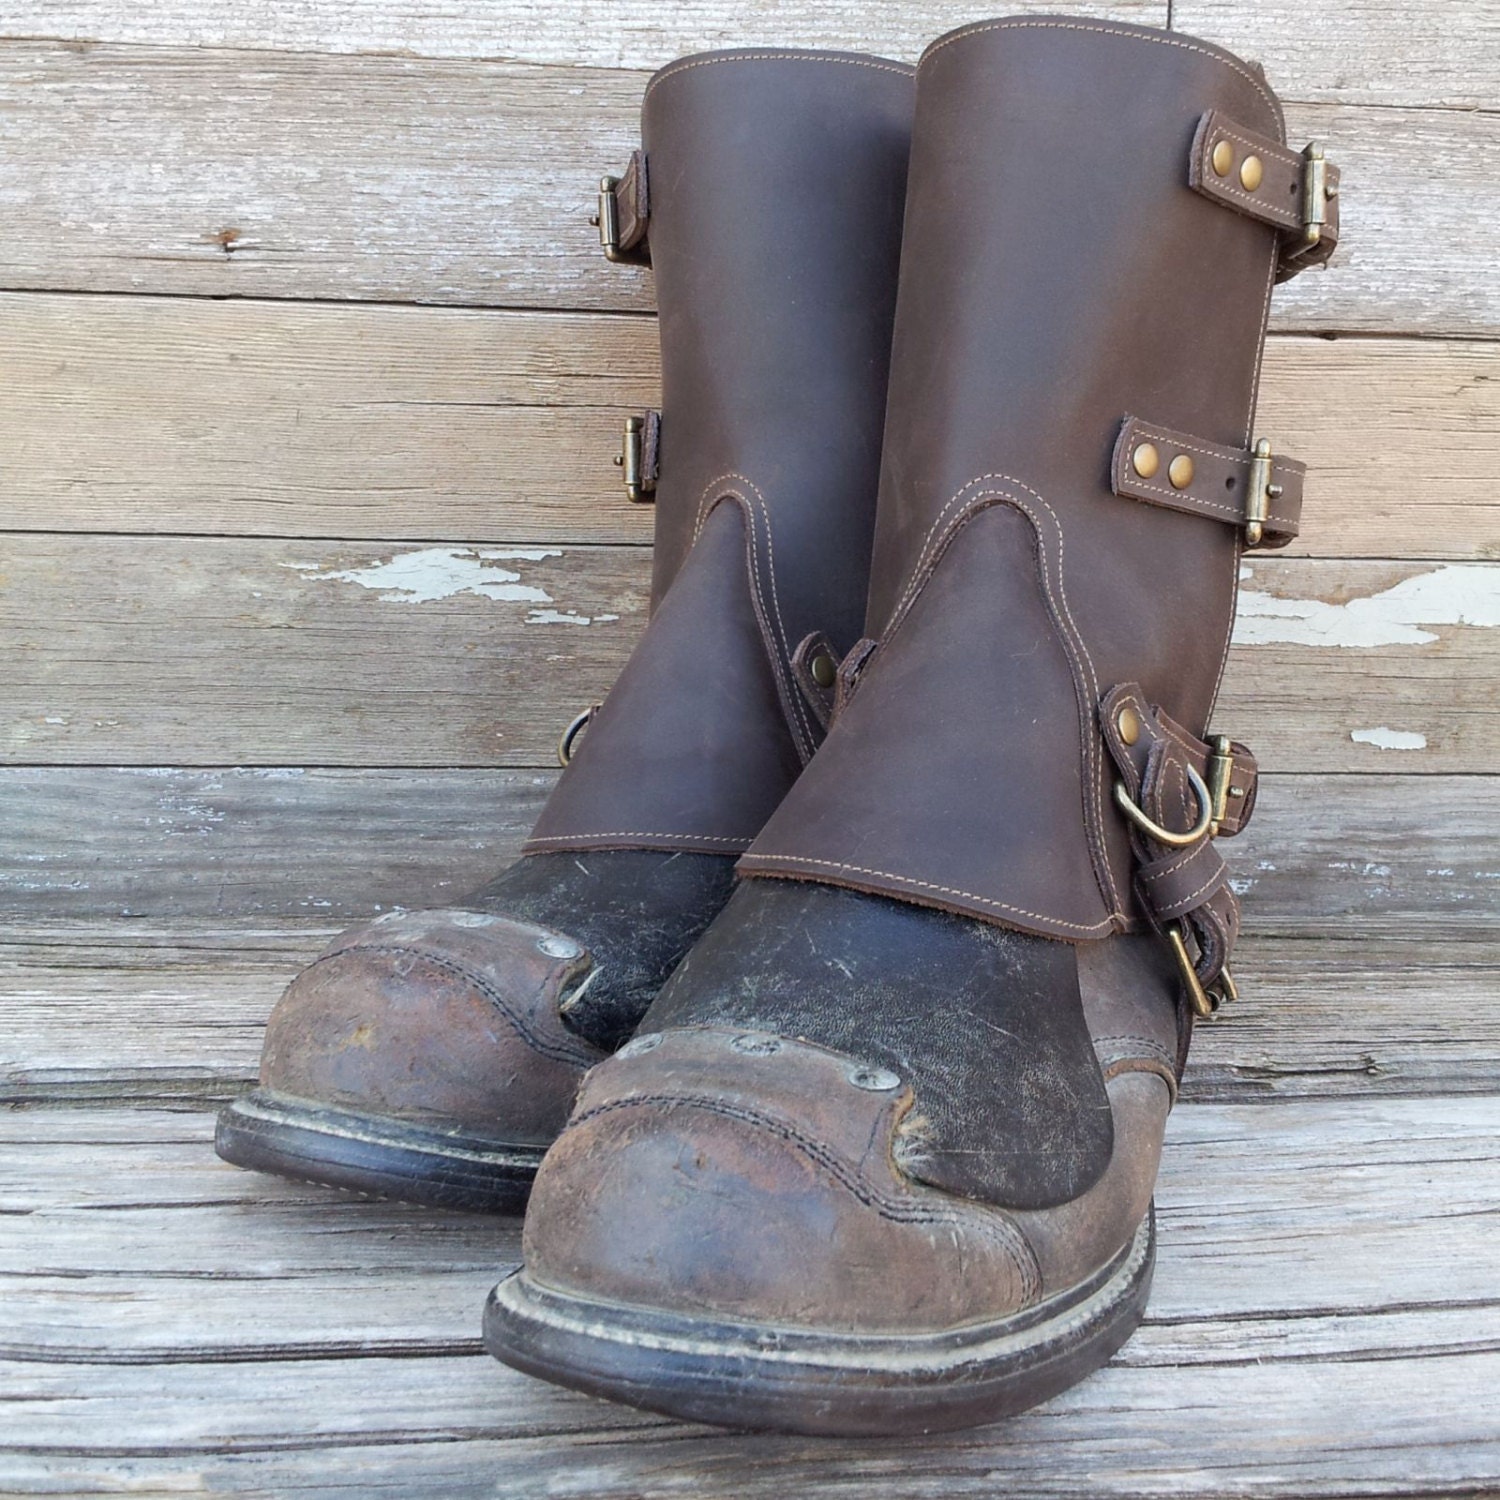 Steampunk Swiss Military Style Gaiters or Spats in Oiled